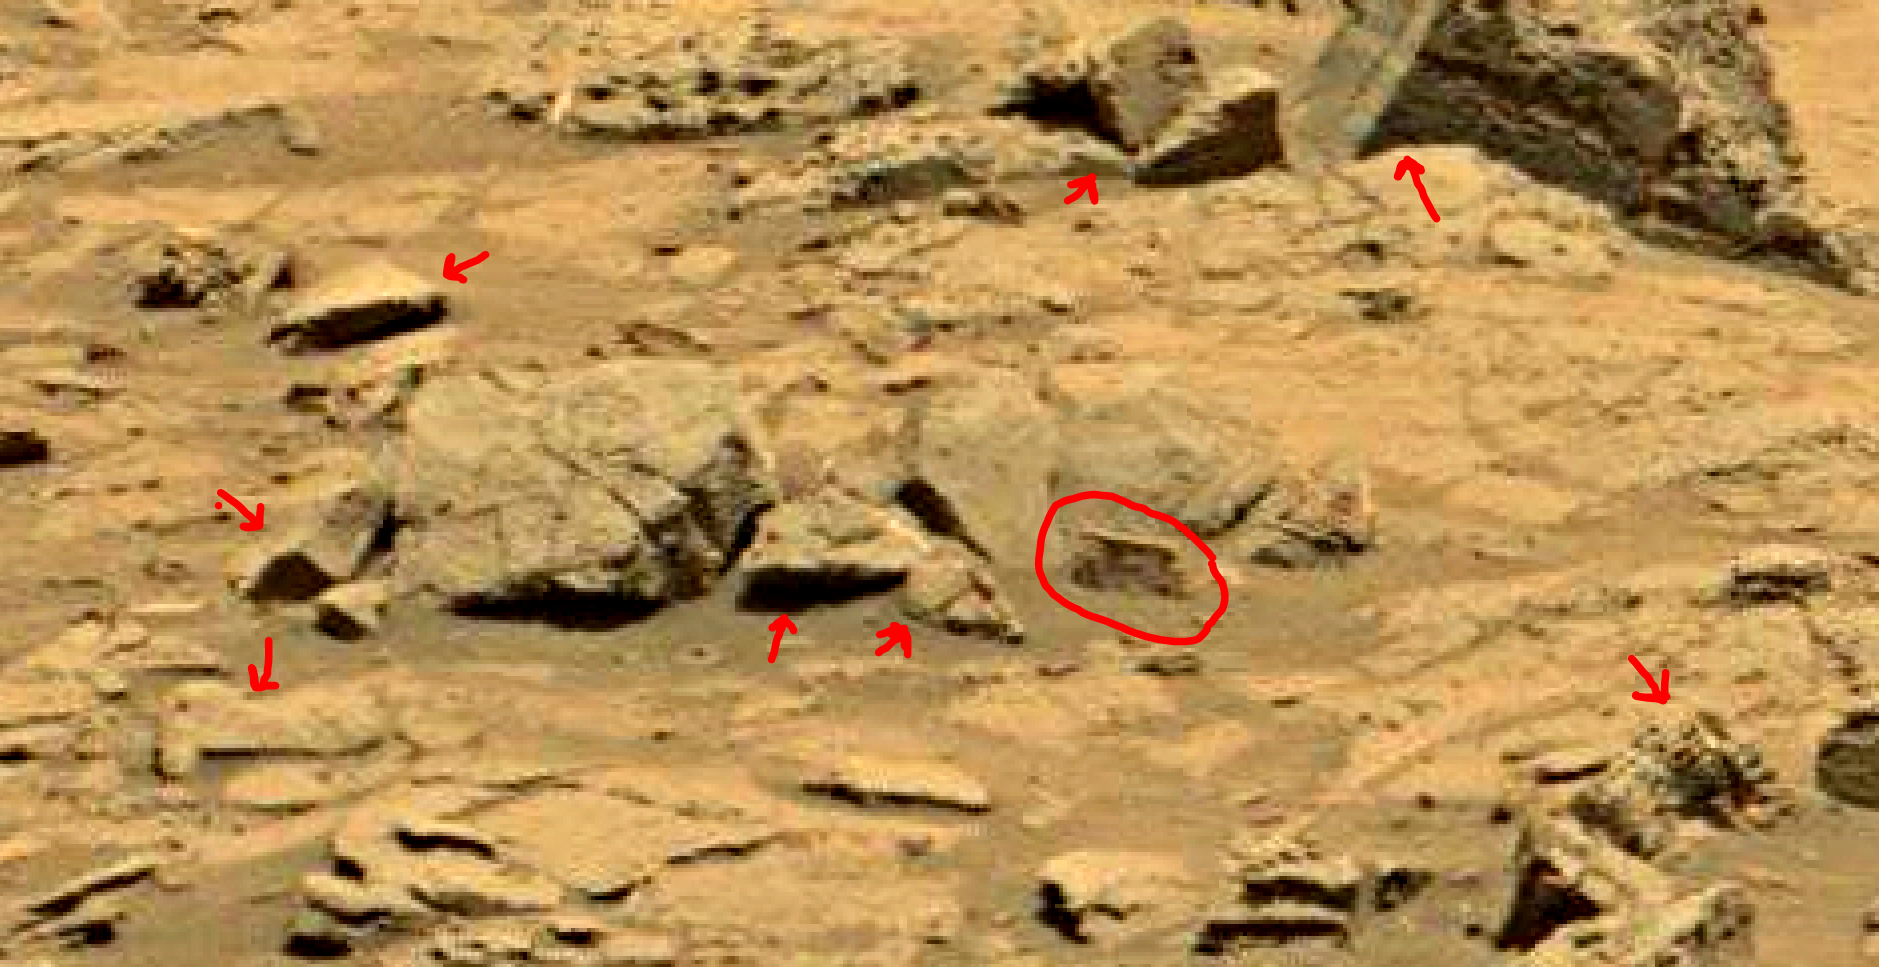 mars sol 1353 anomaly-artifacts 47 was life on mars